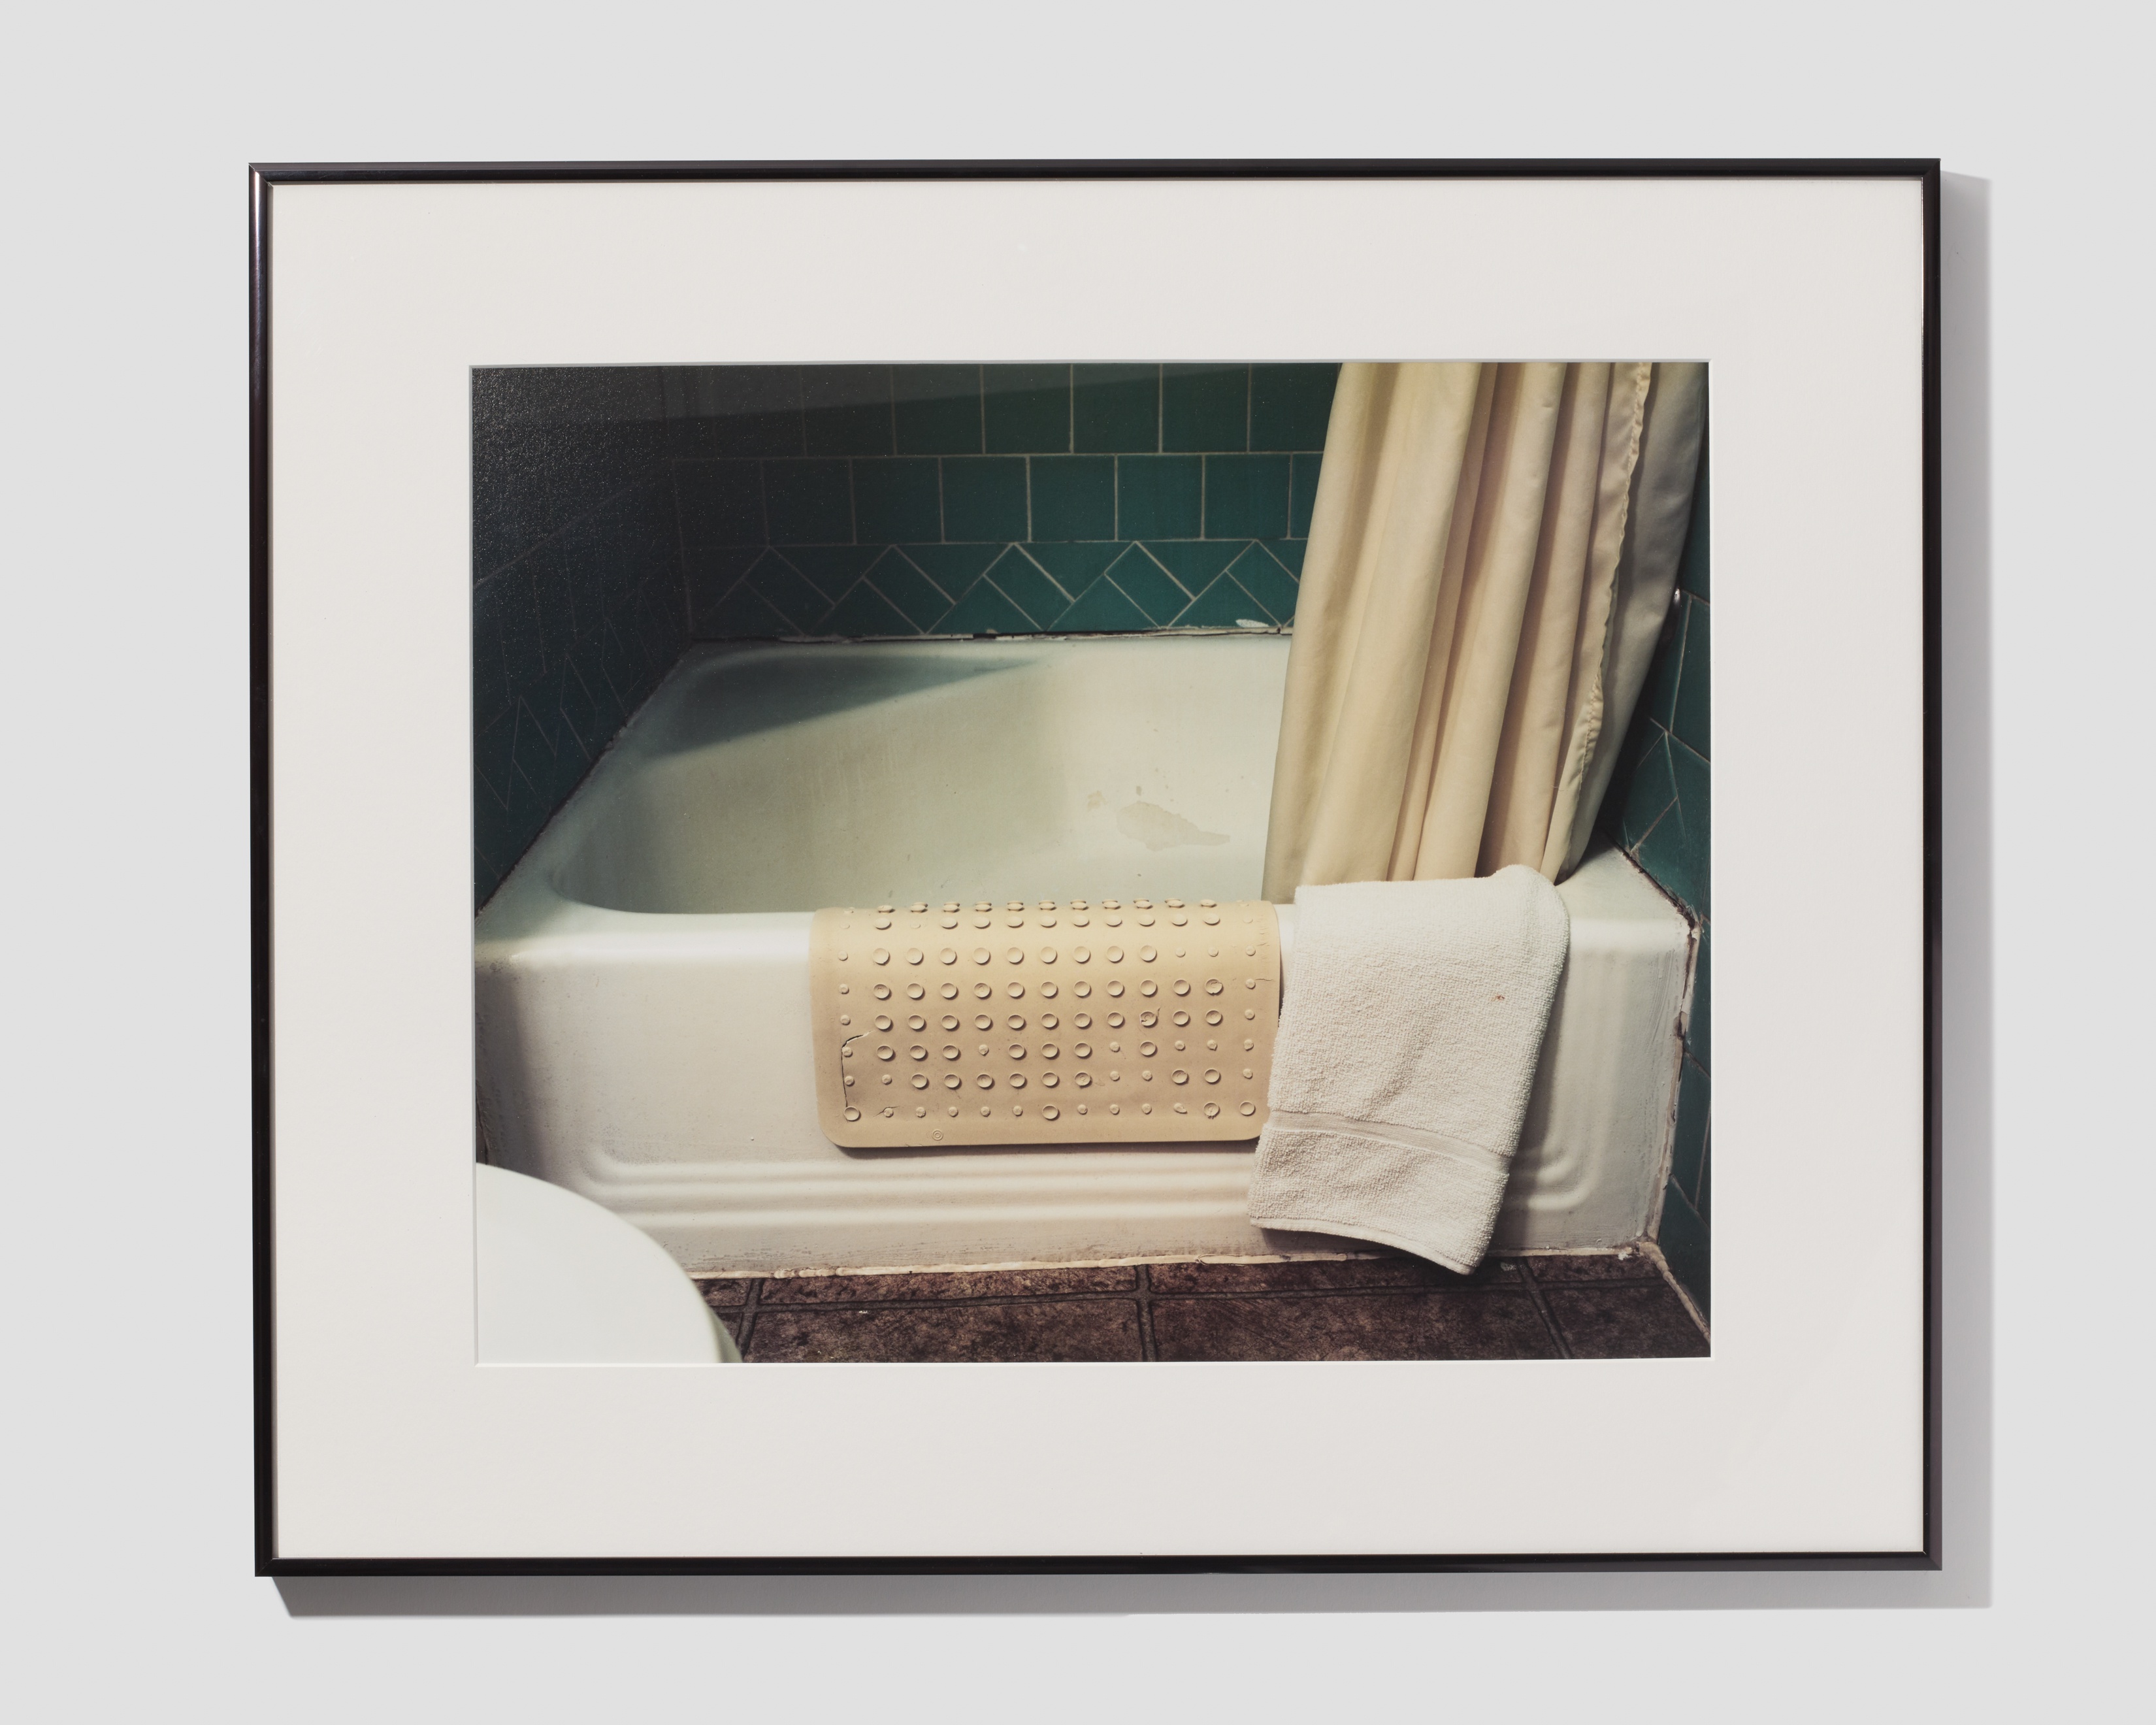 Eric Cousineau, from the American Motel series